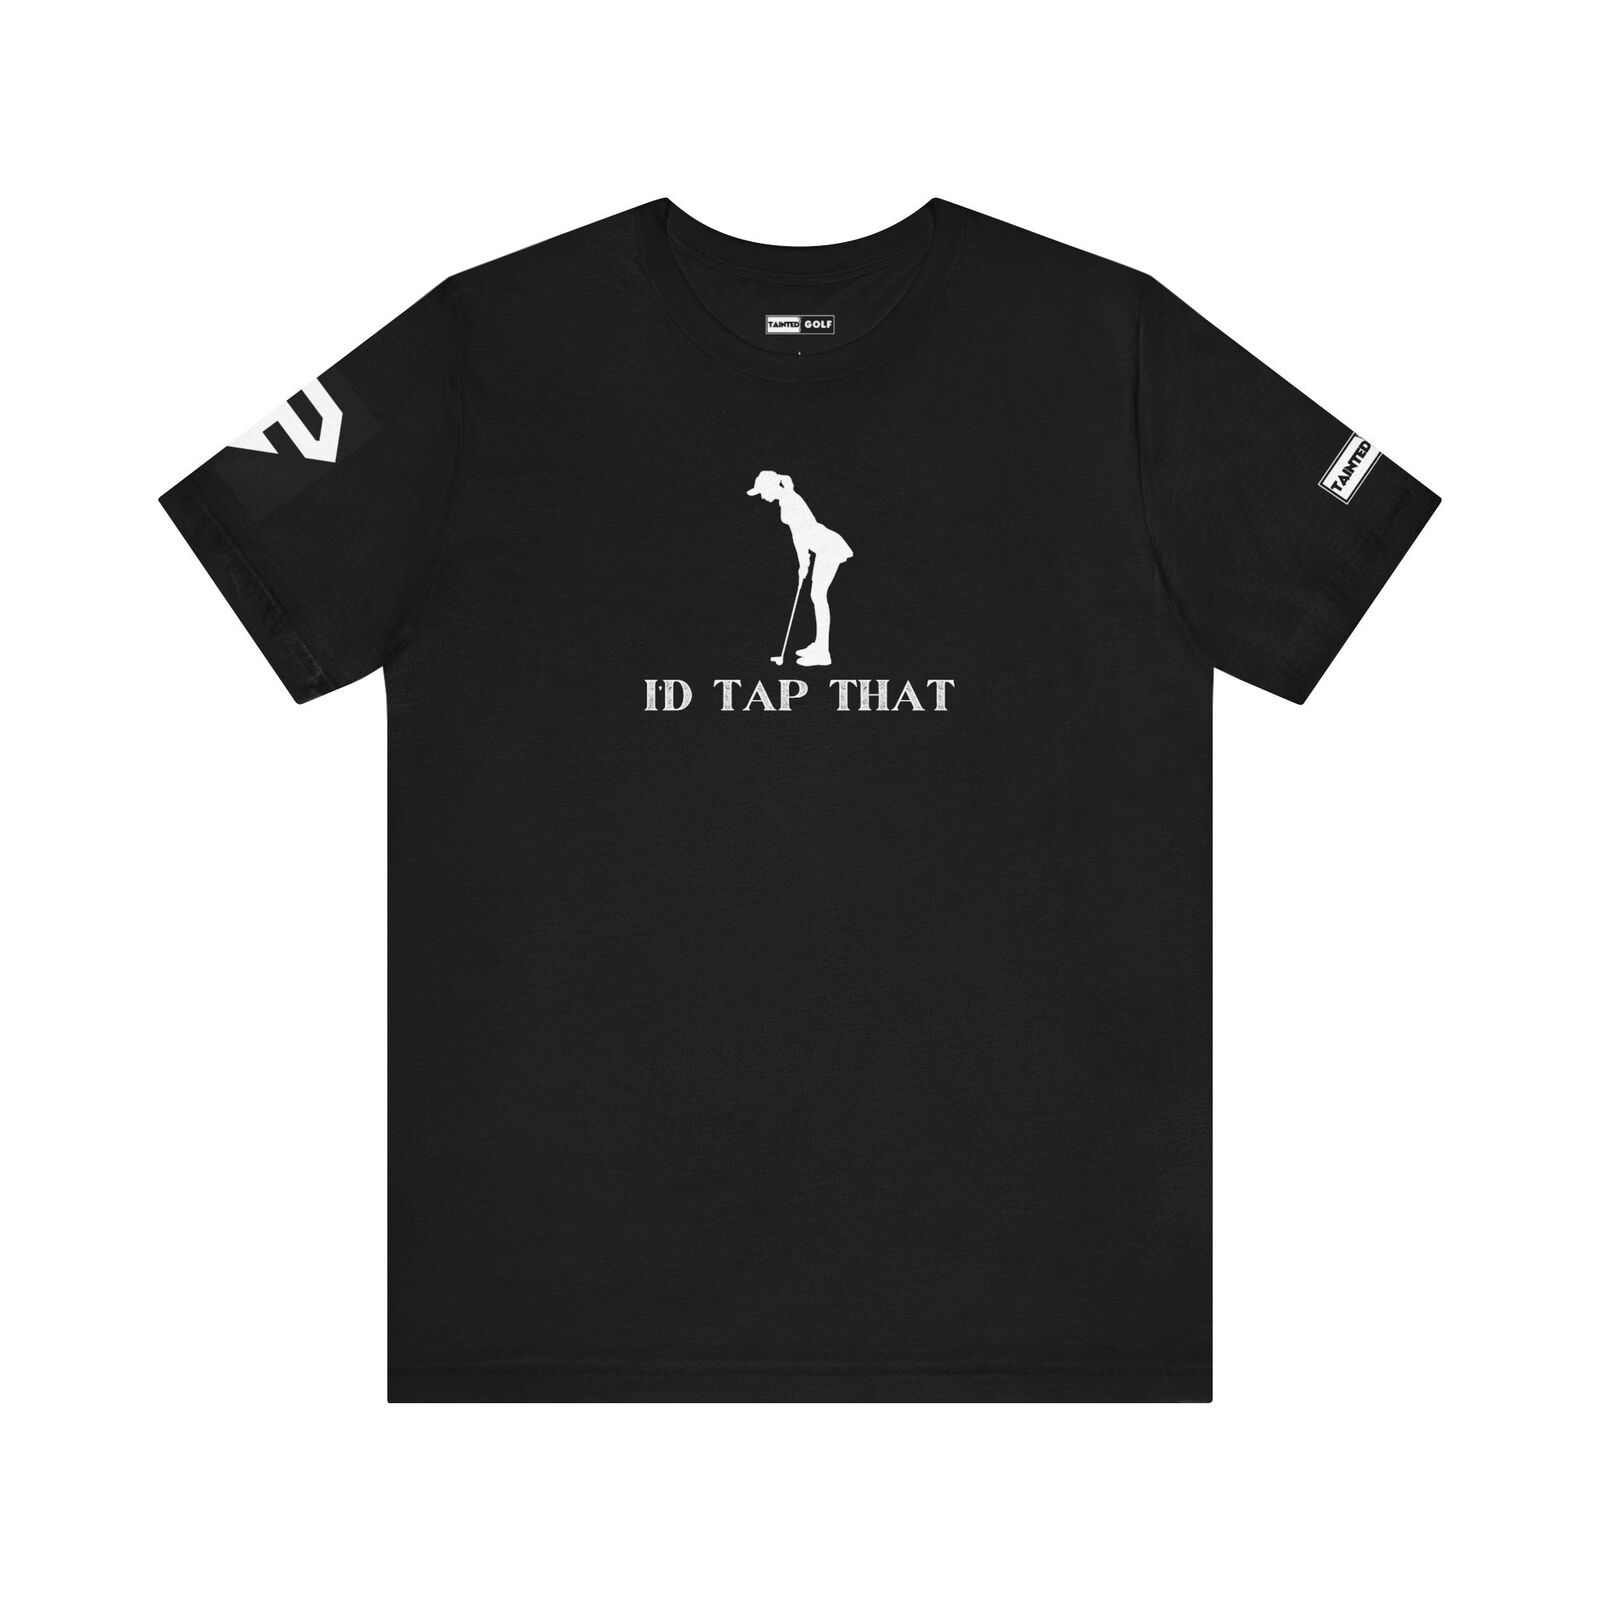 I'd Tap That Humorous Golf Saying TShirt for golf Fans golfers shirt Unisex Jers